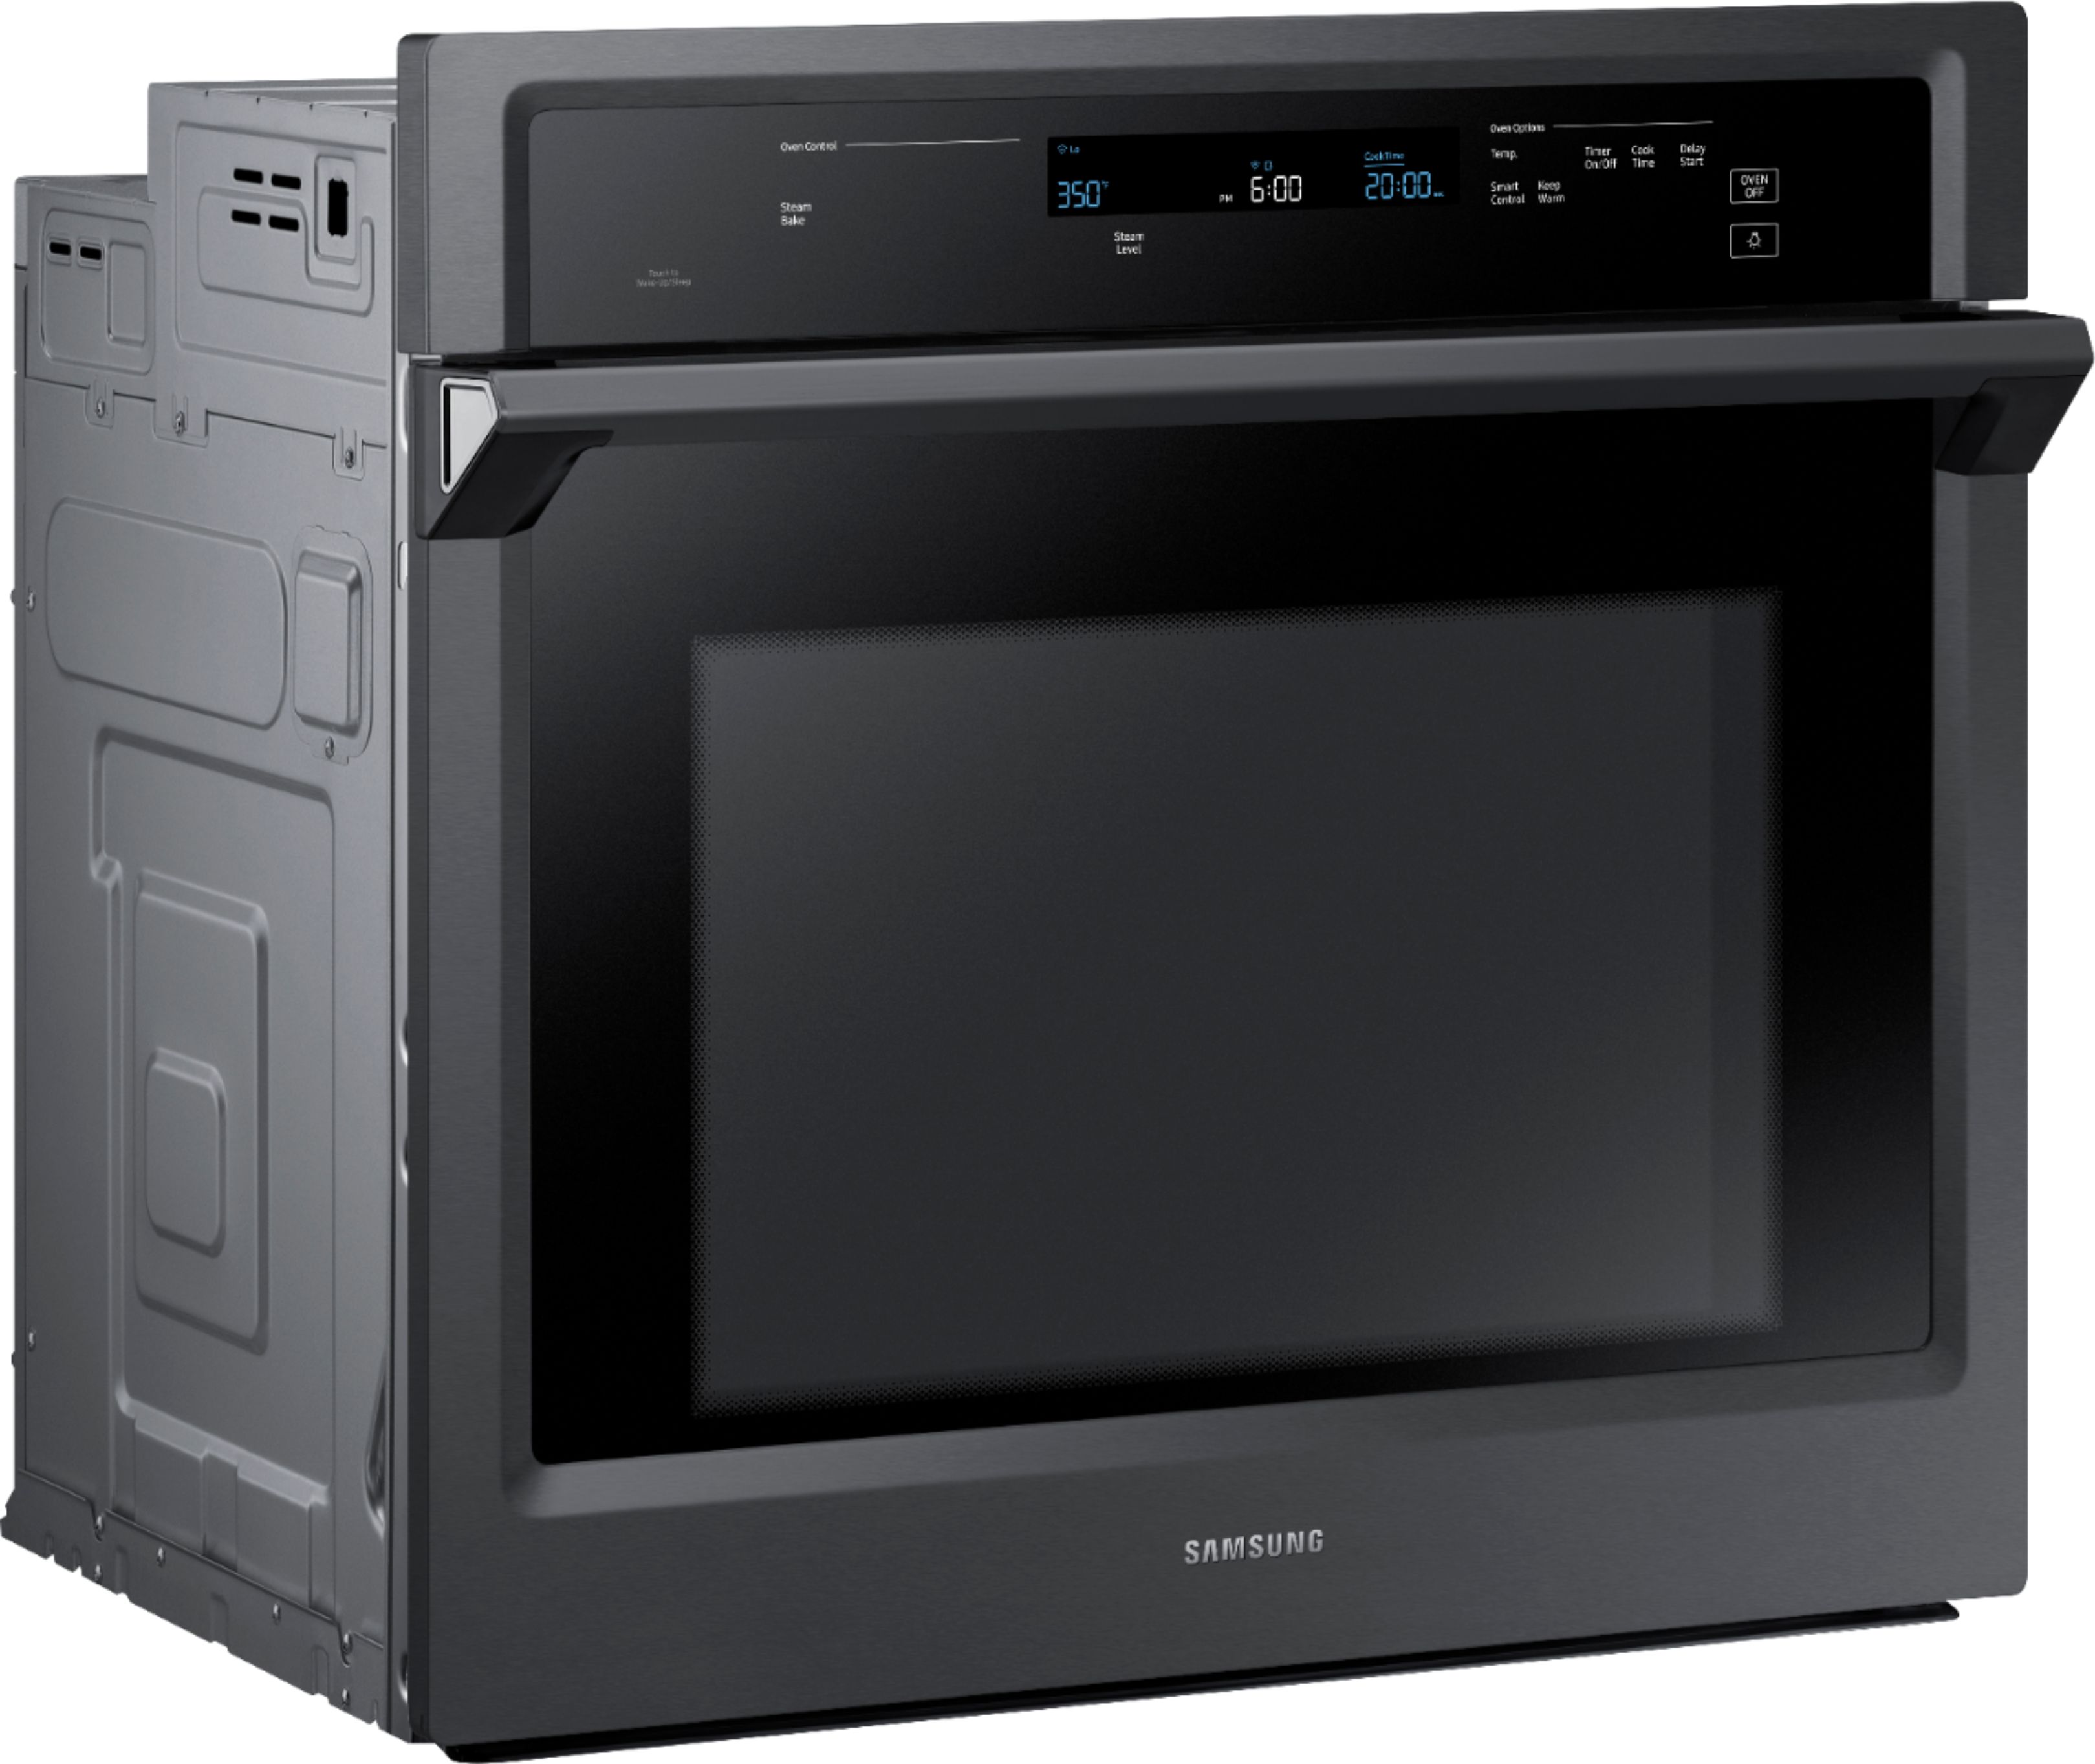 Angle View: Whirlpool - 24" Built-In Single Electric Wall Oven - Stainless steel